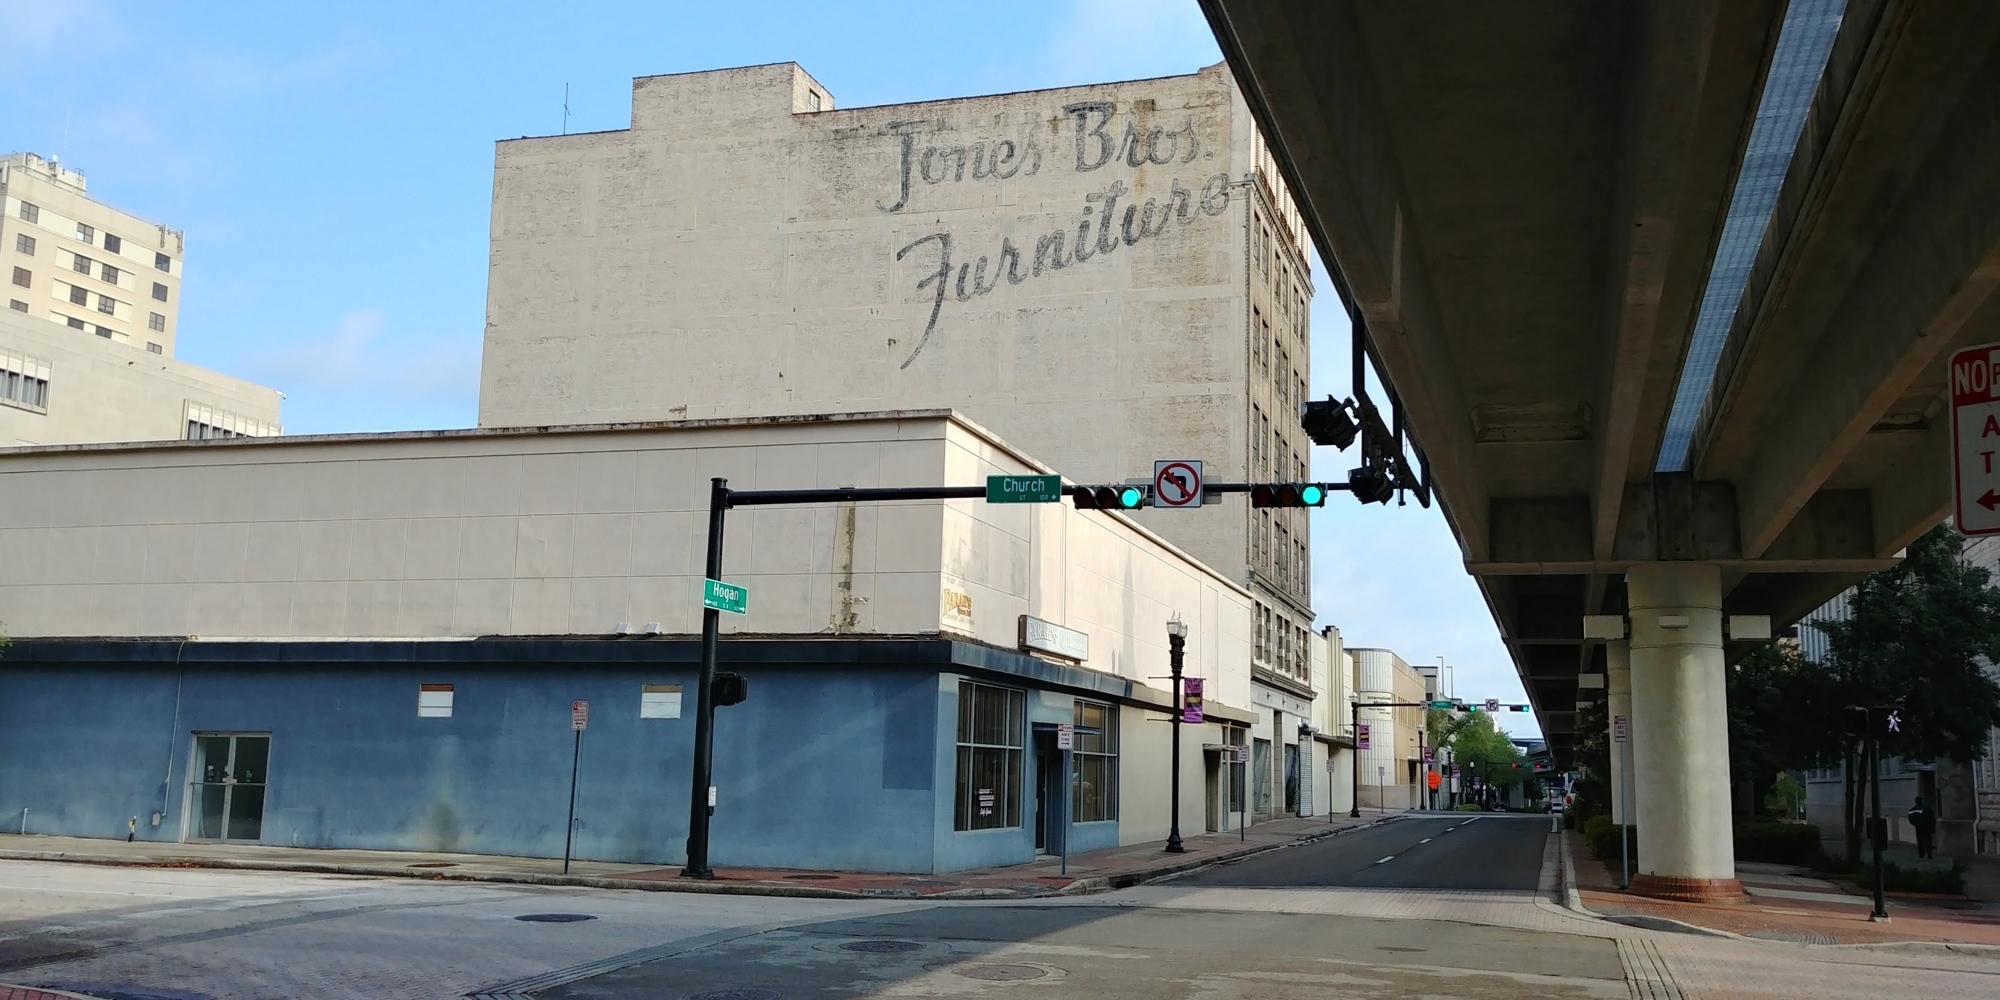 The historic Jones Bros. Furniture building would be transformed into apartments and the Farah’s Uptown Deli property would be torn down for an apartment tower under the Corner Lot plan.